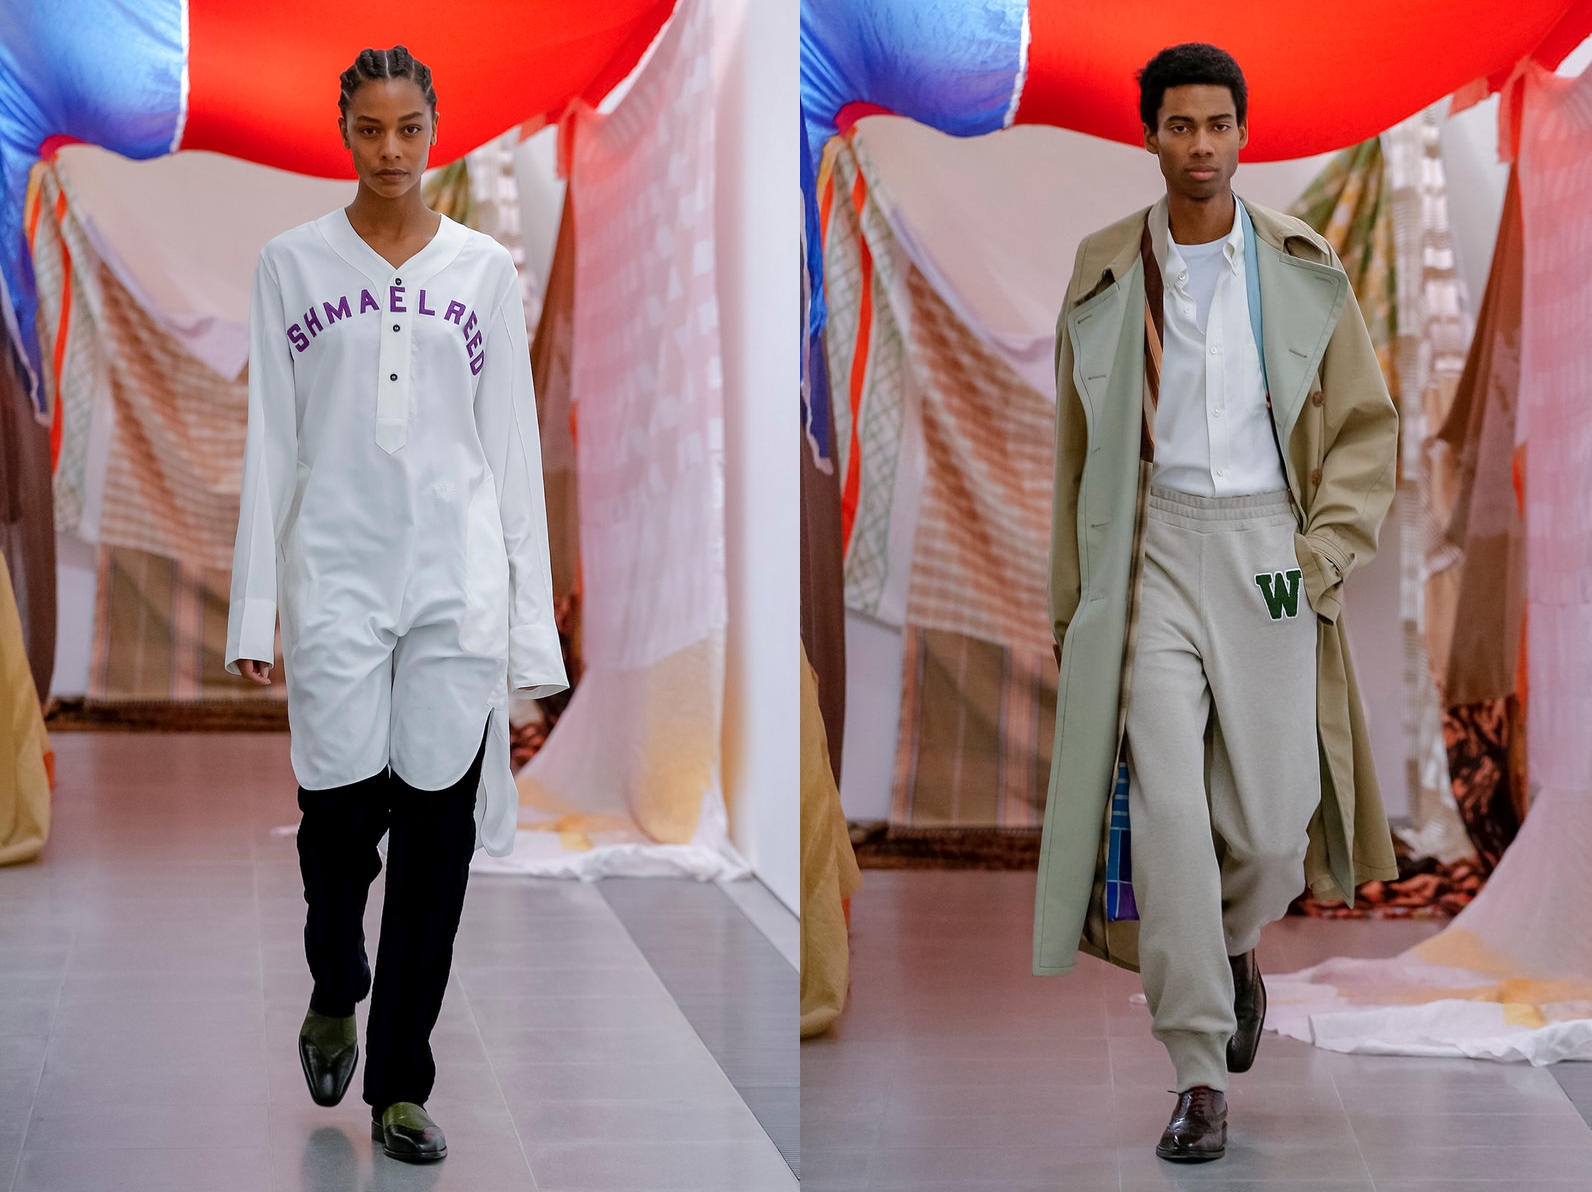 Wales Bonner Explores African Heritage for Fall/Winter 2019 Collection